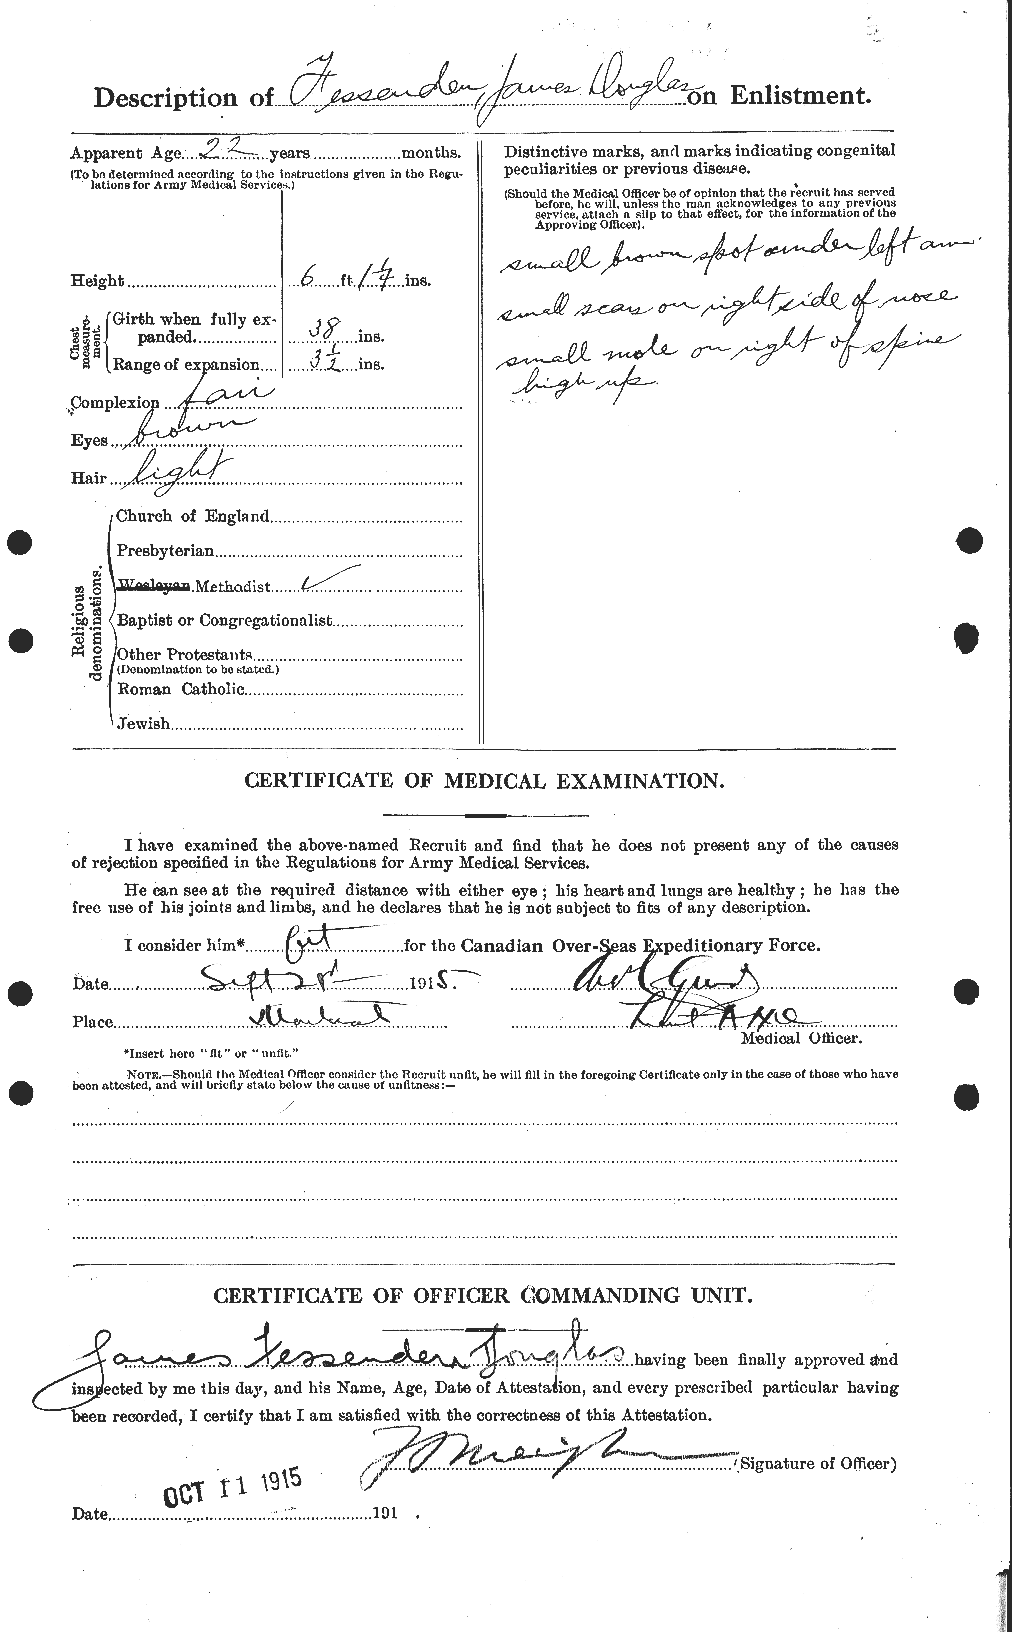 Personnel Records of the First World War - CEF 325840b